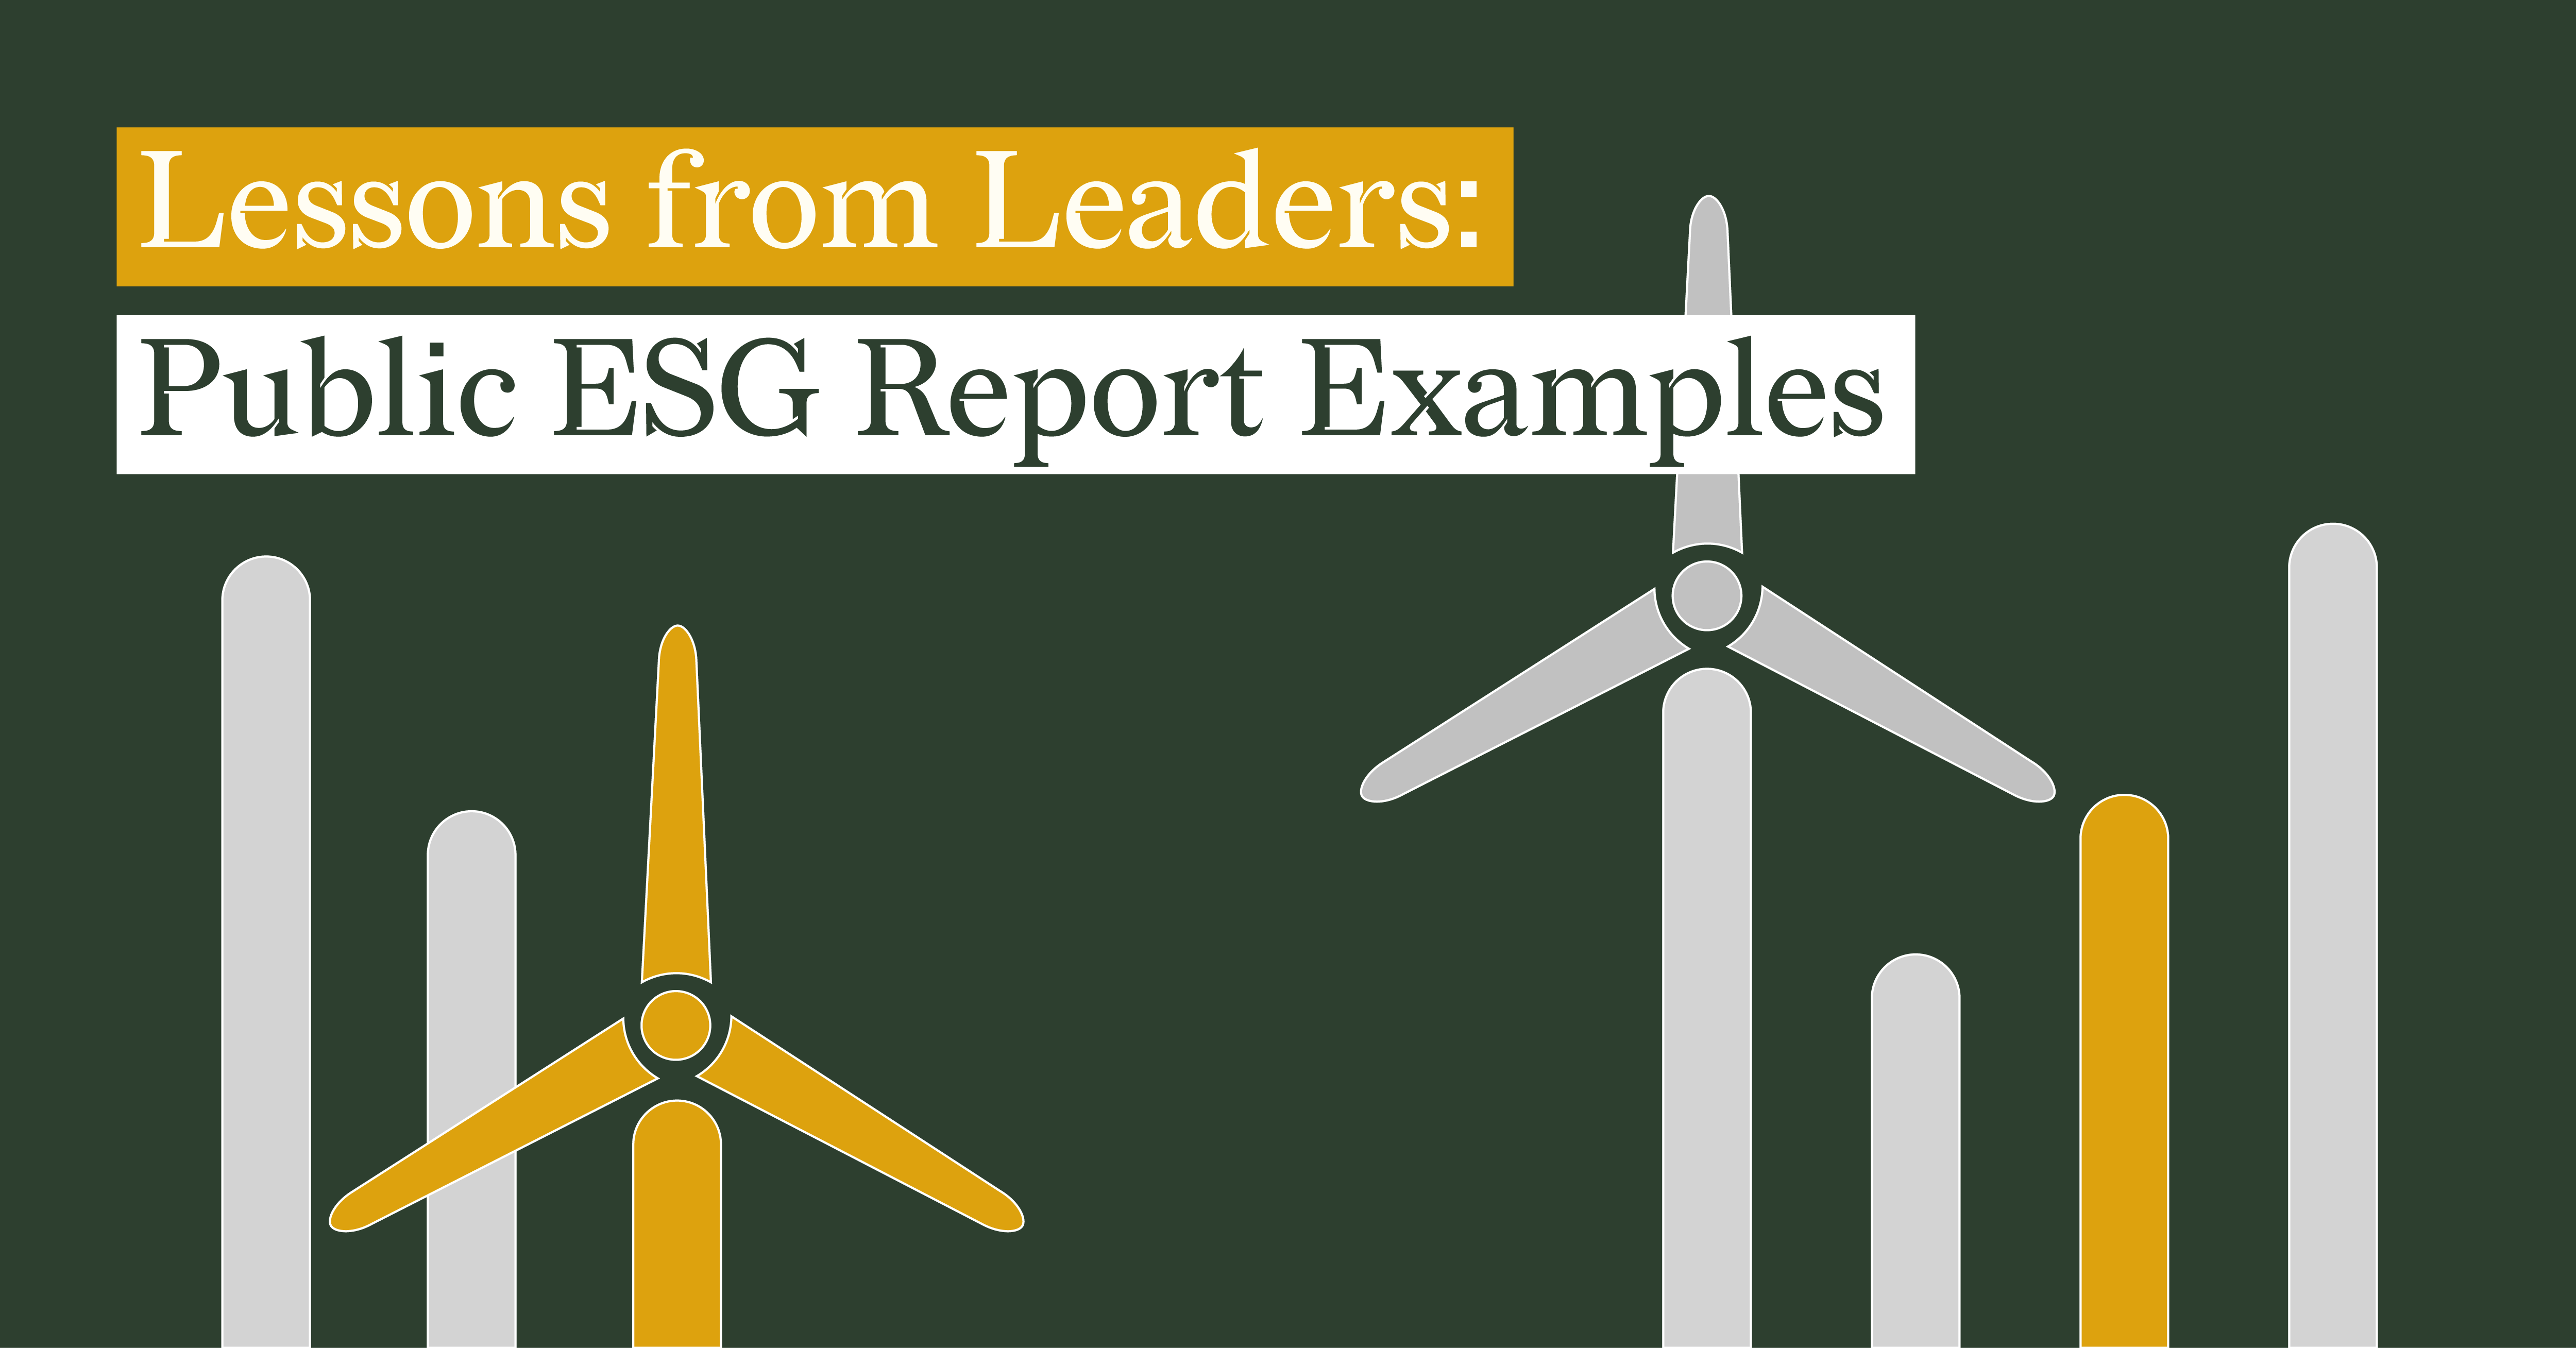 The image features a green, yellow, grey, and white color scheme. Two bar charts are shown of which two bars represent wind turbines. 